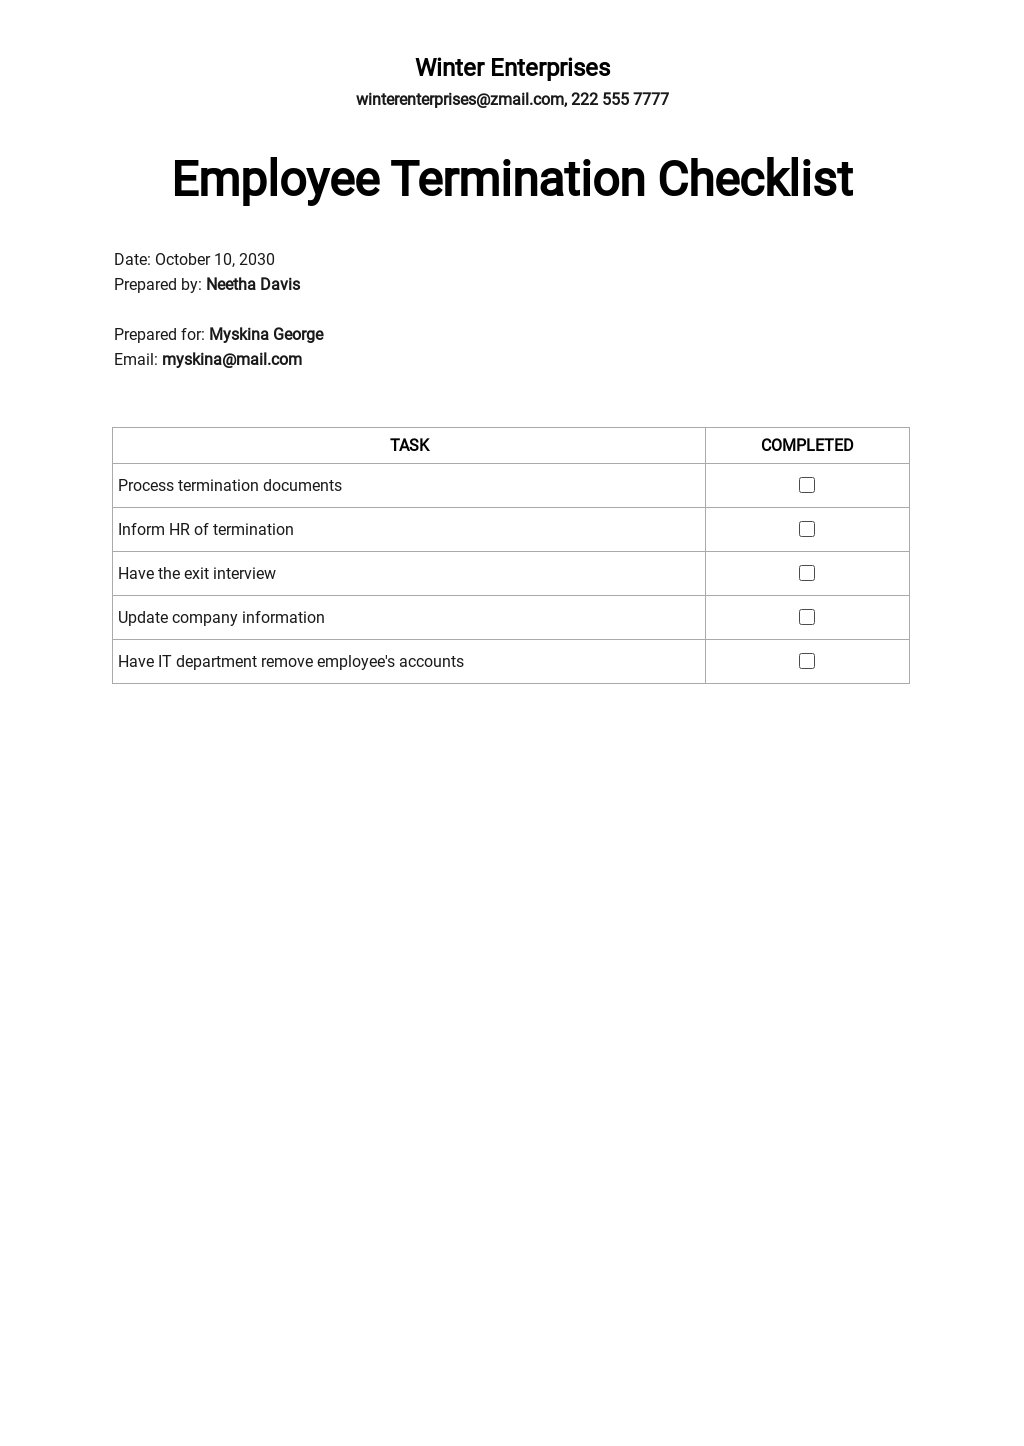 Employee Hiring HR Checklist Template - Word, Apple Pages, PDF ...